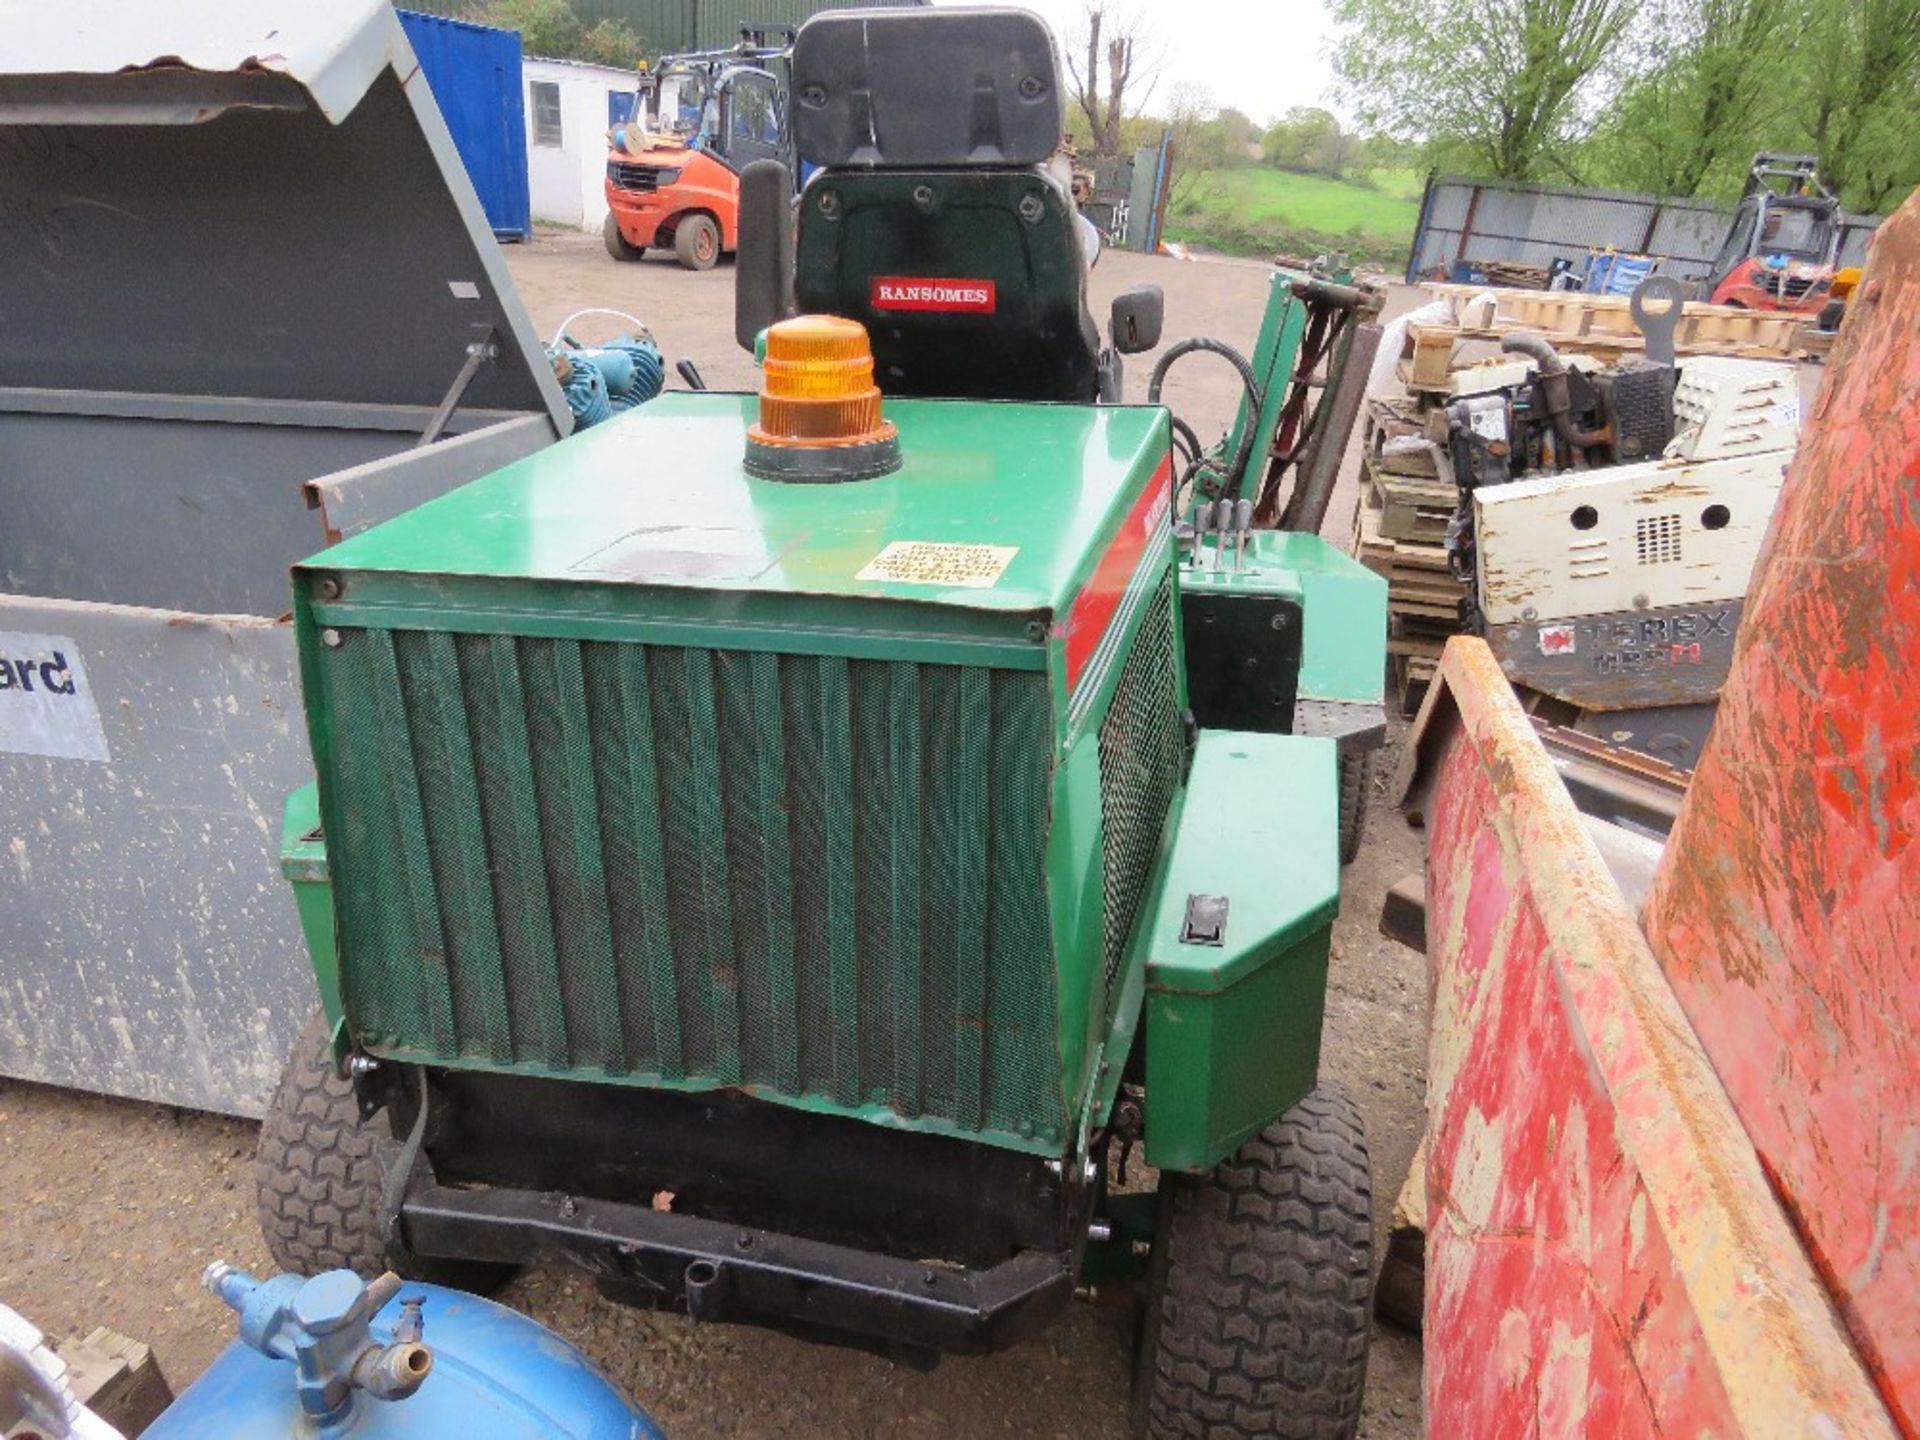 RANSOMES 213 TRIPLE RIDE ON CYLINDER MOWER WITH KUBOTA ENGINE. WHEN TESTED WAS SEEN TO DRIVE, STEER, - Image 5 of 11